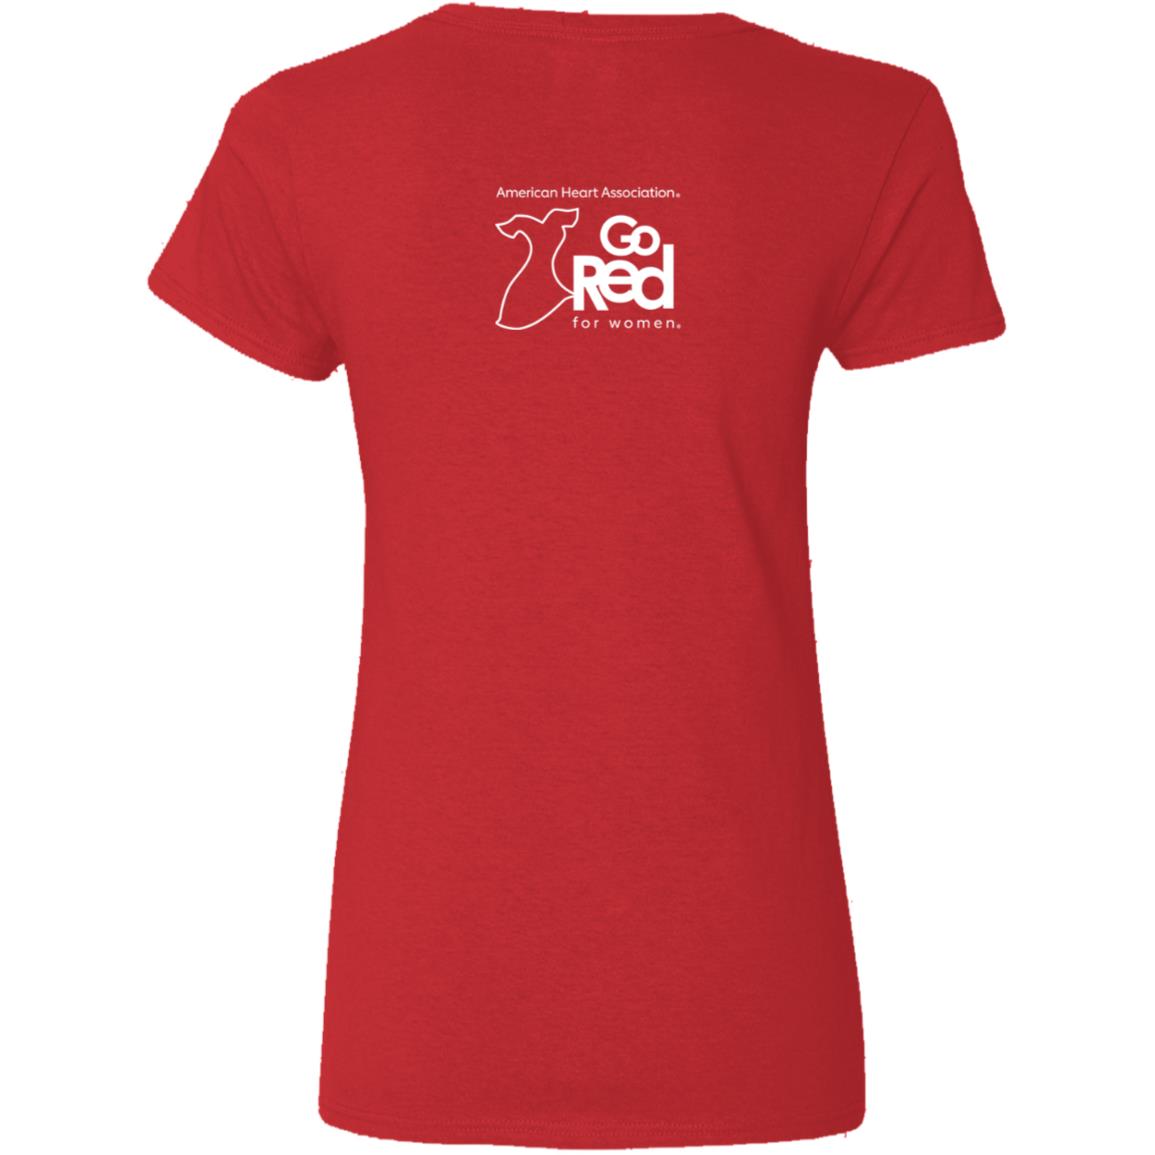 Showing back of shirt with the enitre American Heart Association Go Red for women  logo across the upper back